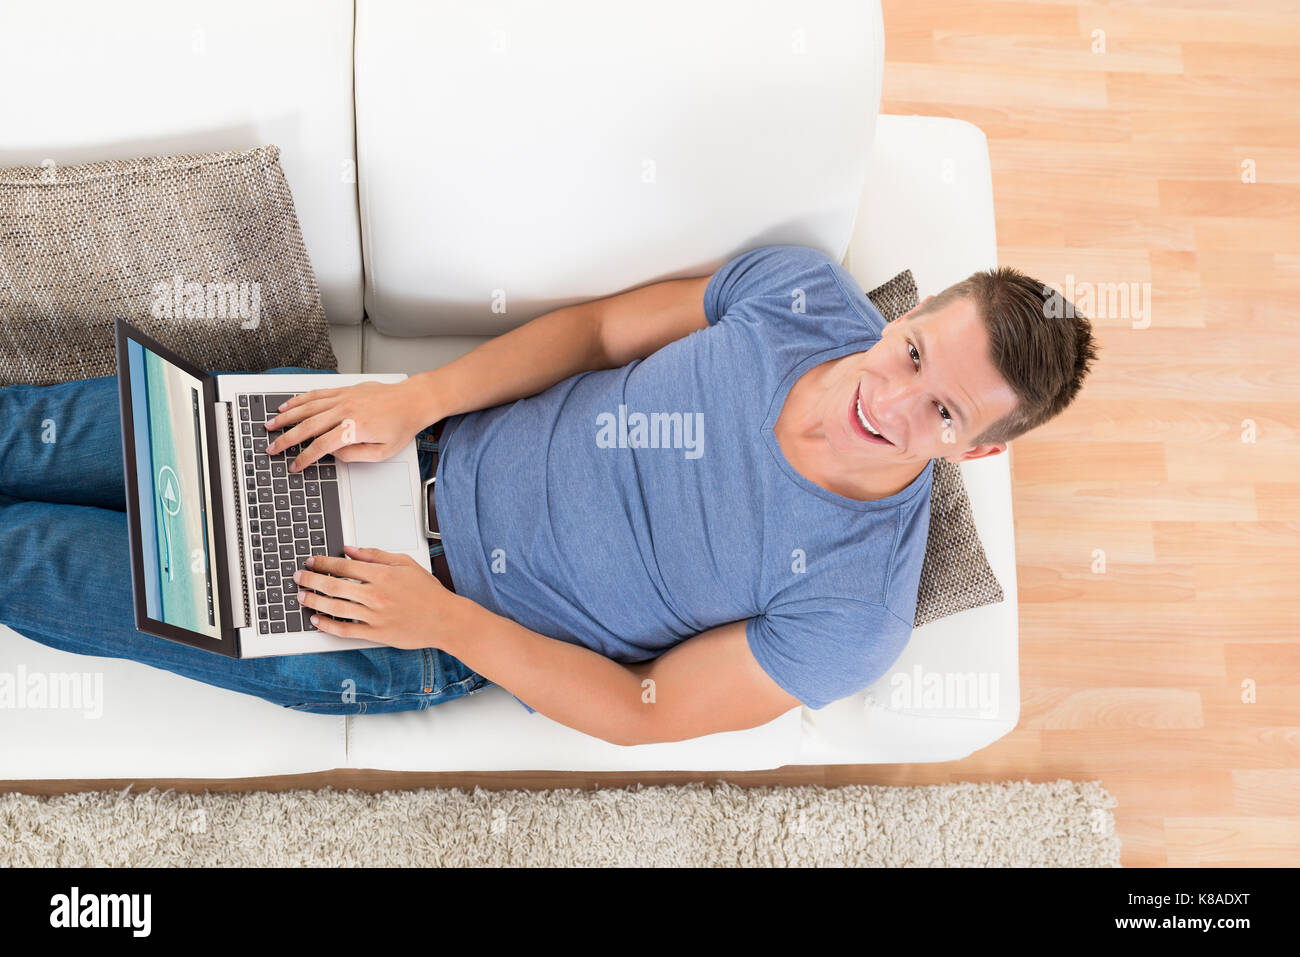 High Angle View Of Young Man Watching Video On Laptop At Home Stock Photo